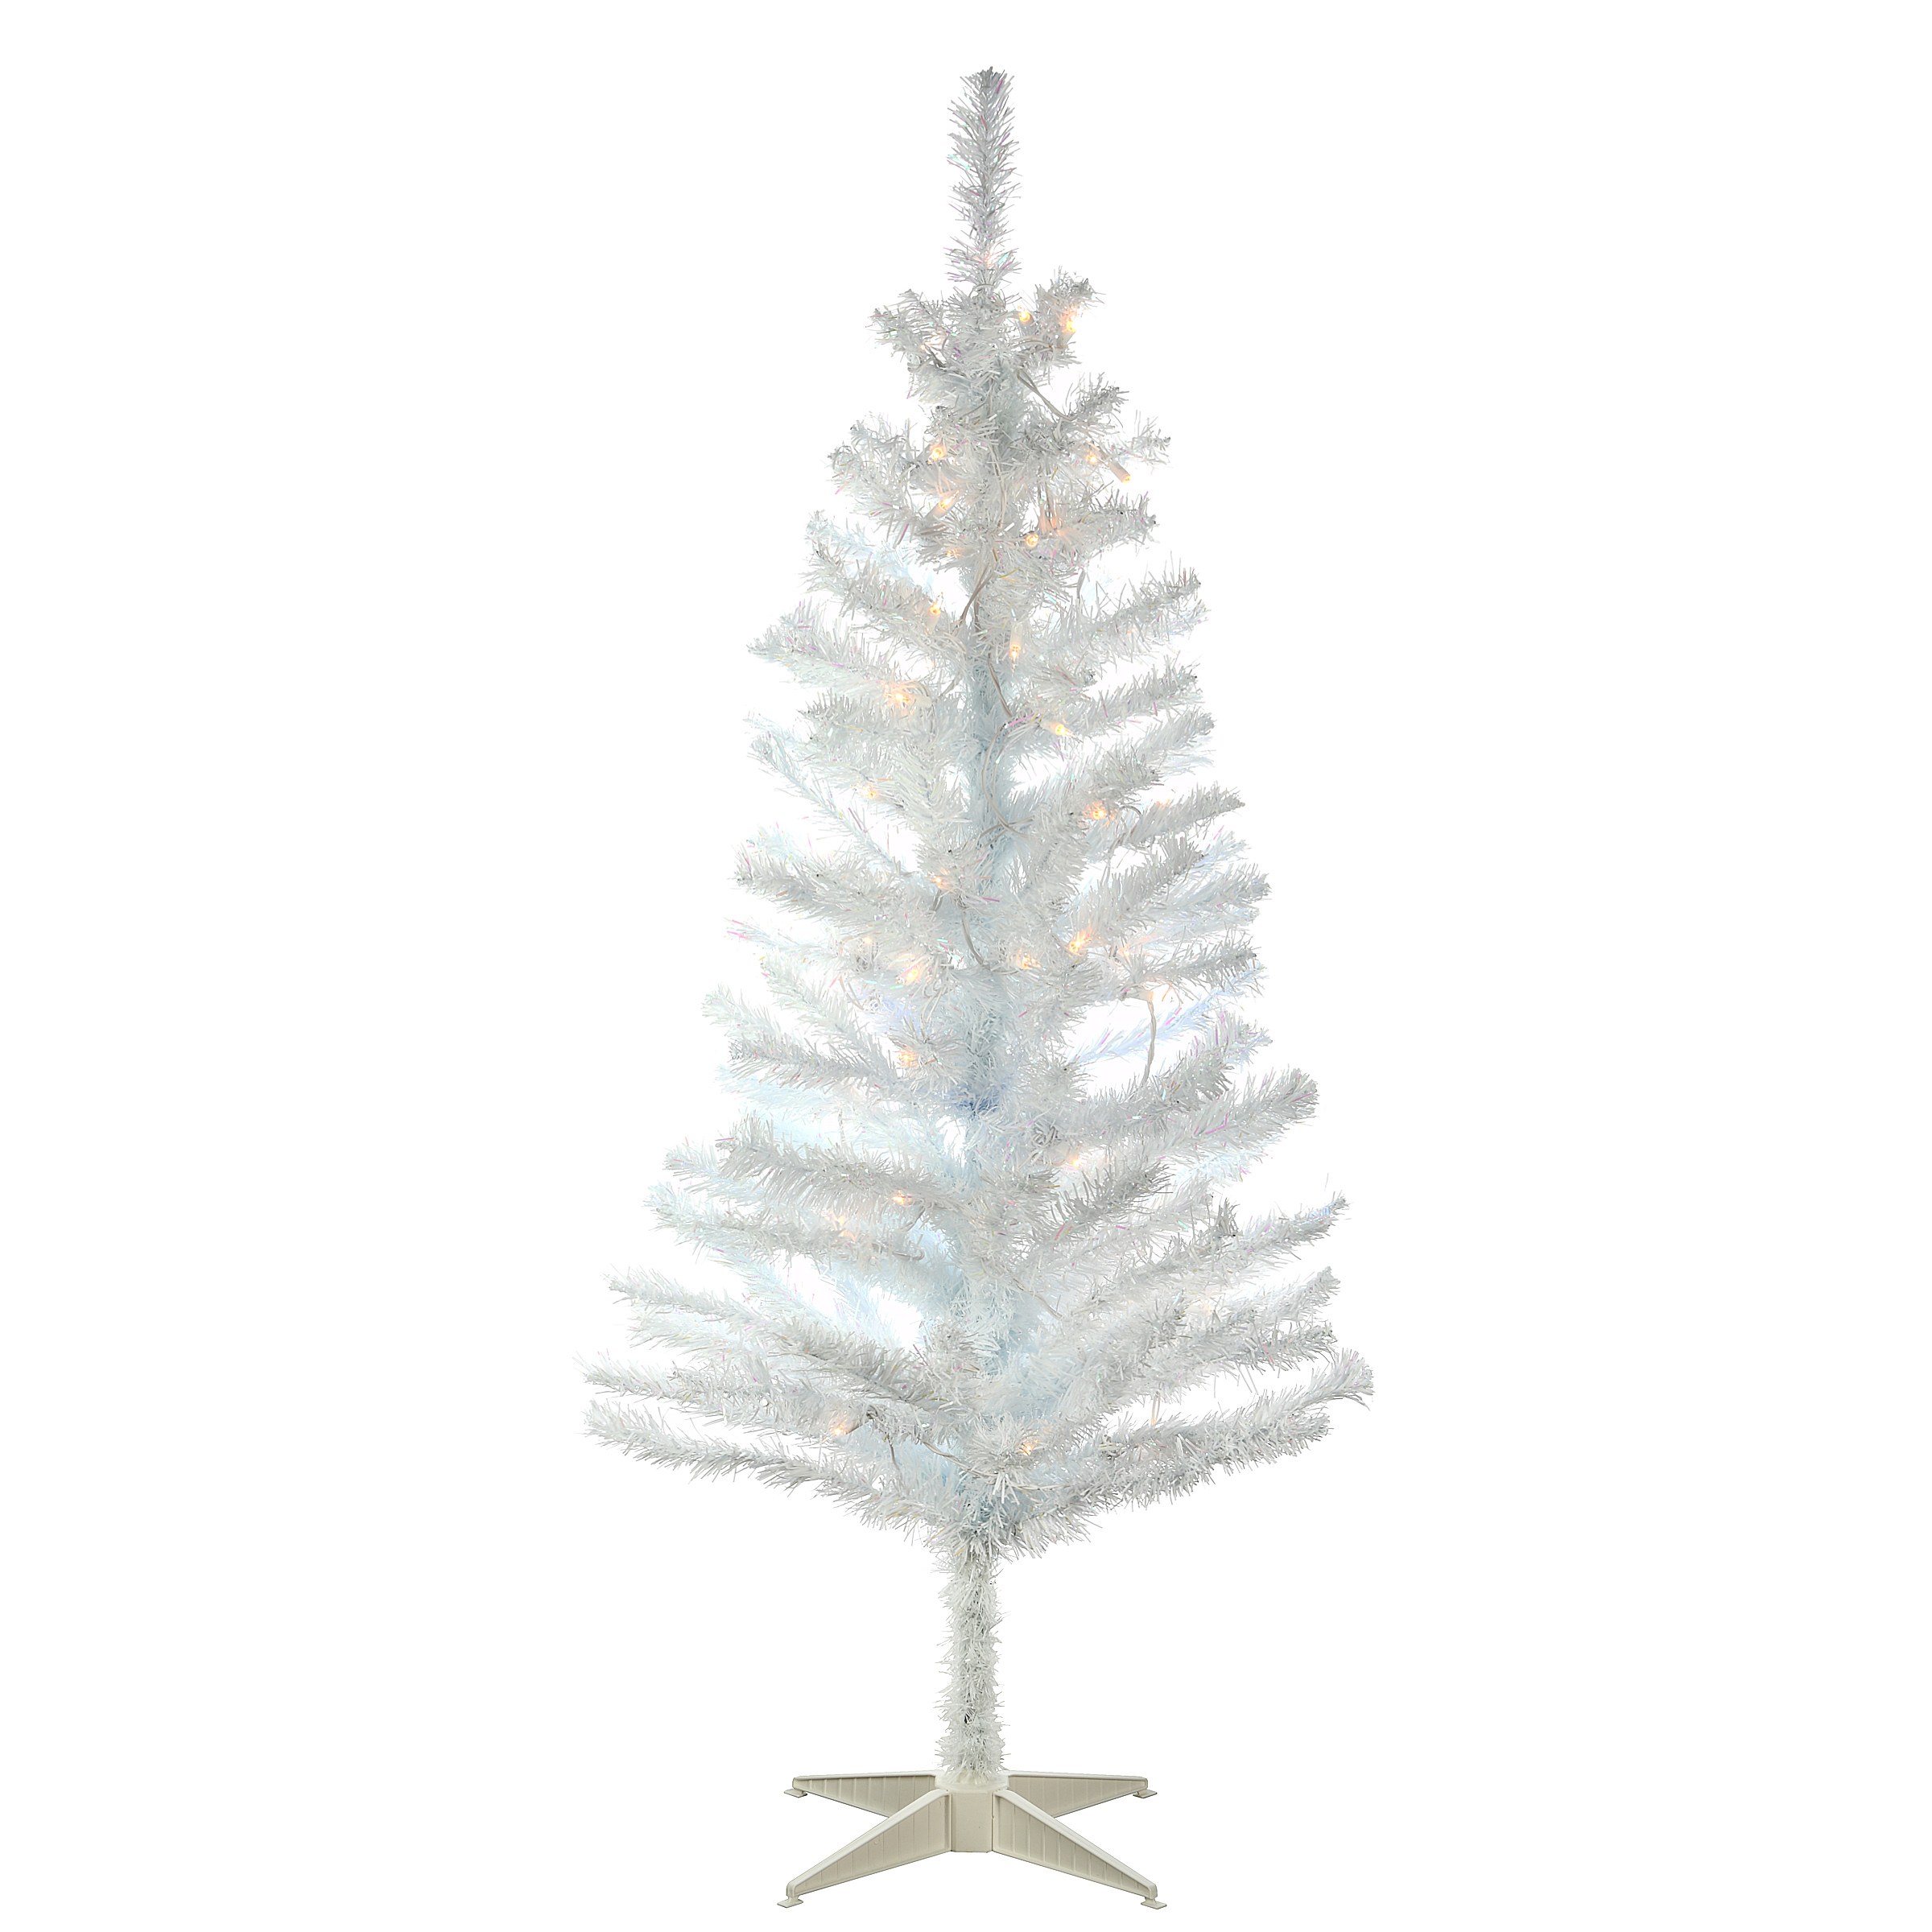 National Tree Company Pre-Lit Artificial Christmas Tree, White Tinsel, White Lights, Includes Stand, 4 feet - image 1 of 6